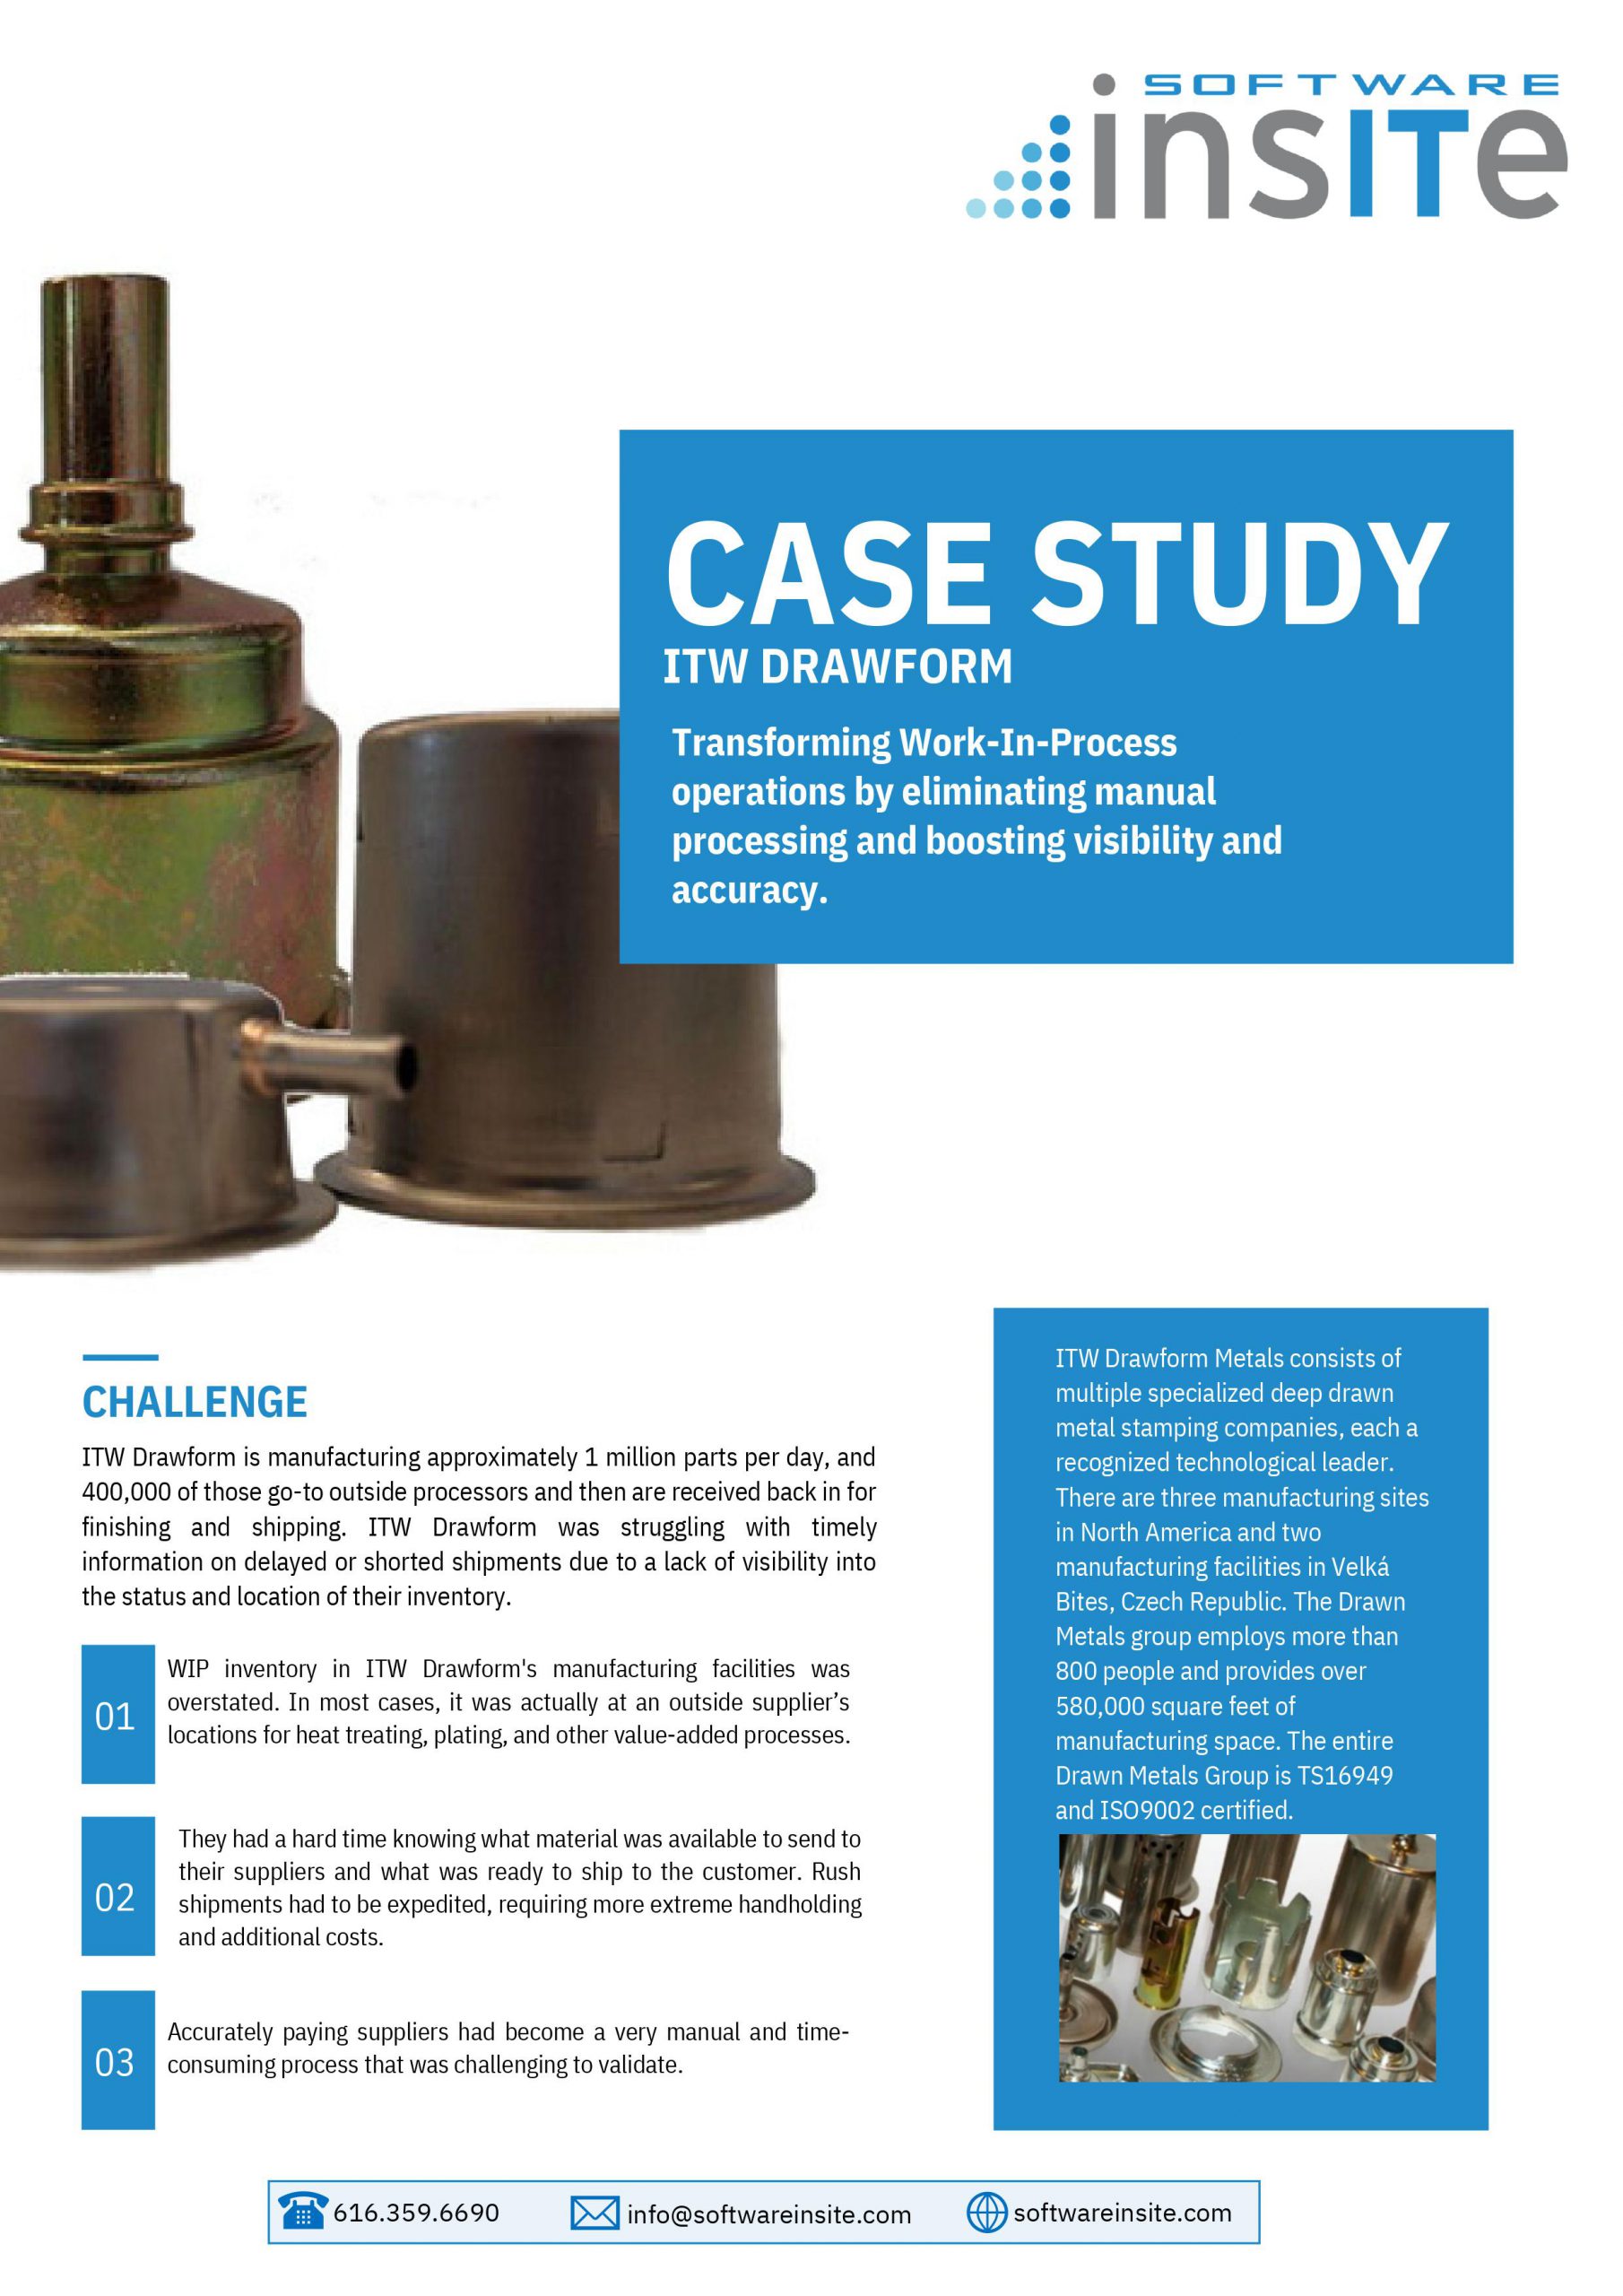 ITW Drawform case study - Software InsITe